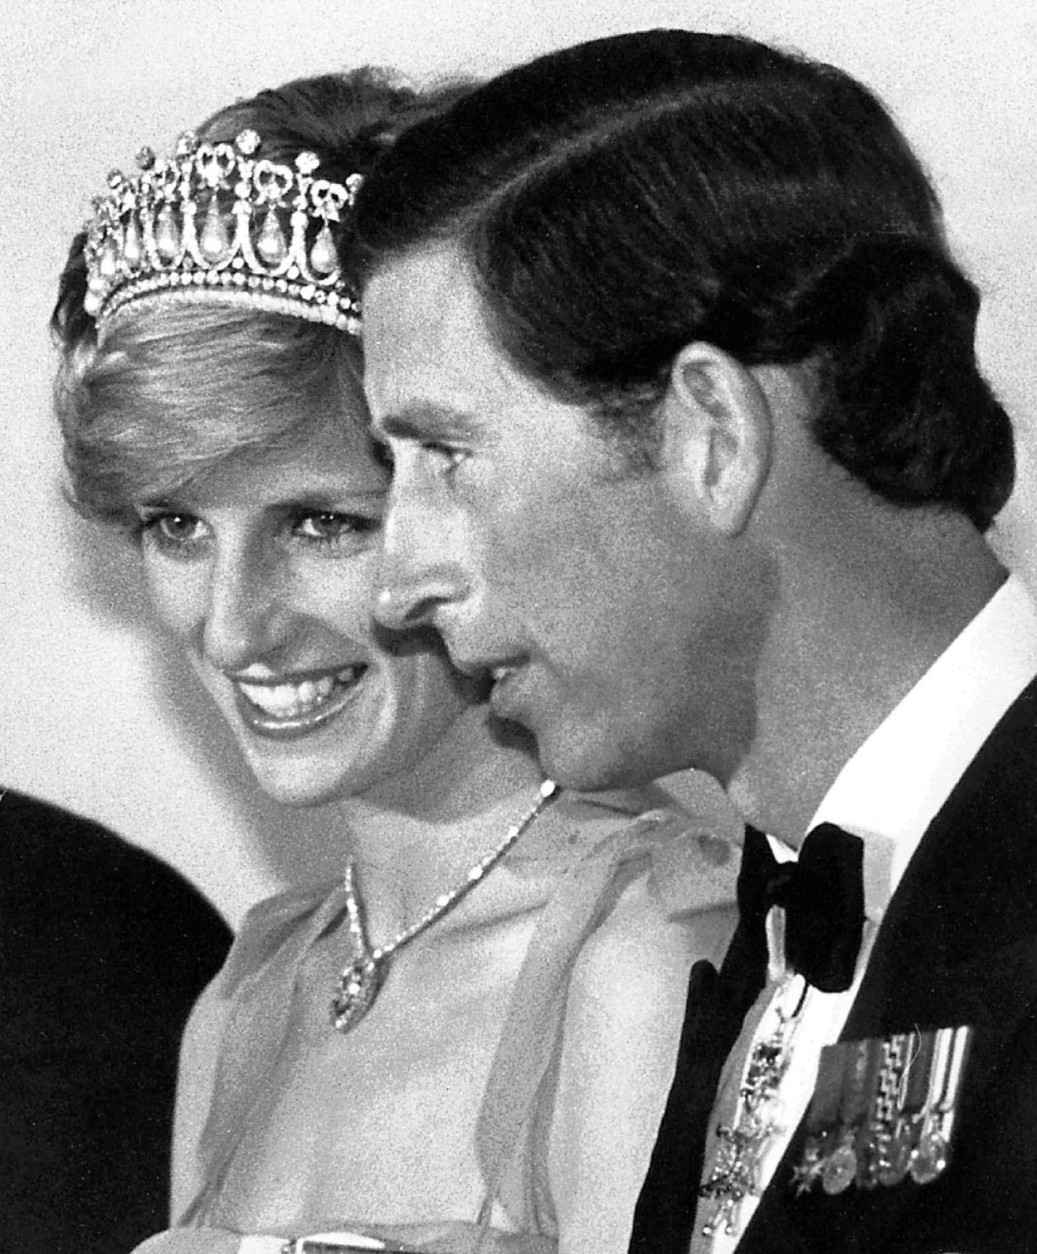 Diana, Princess of Wales, stands with Prince Charles as they arrive for a formal dinner in Ottawa, Canada, at Governor General Ed Schreyer's home in this June 20, 1983, file photo. Diana, her companion Dodi Fayed and their chauffeur were killed in a car accident early Sunday in Paris. (AP Photo/PA) *UNITED KINGDOM OUT*